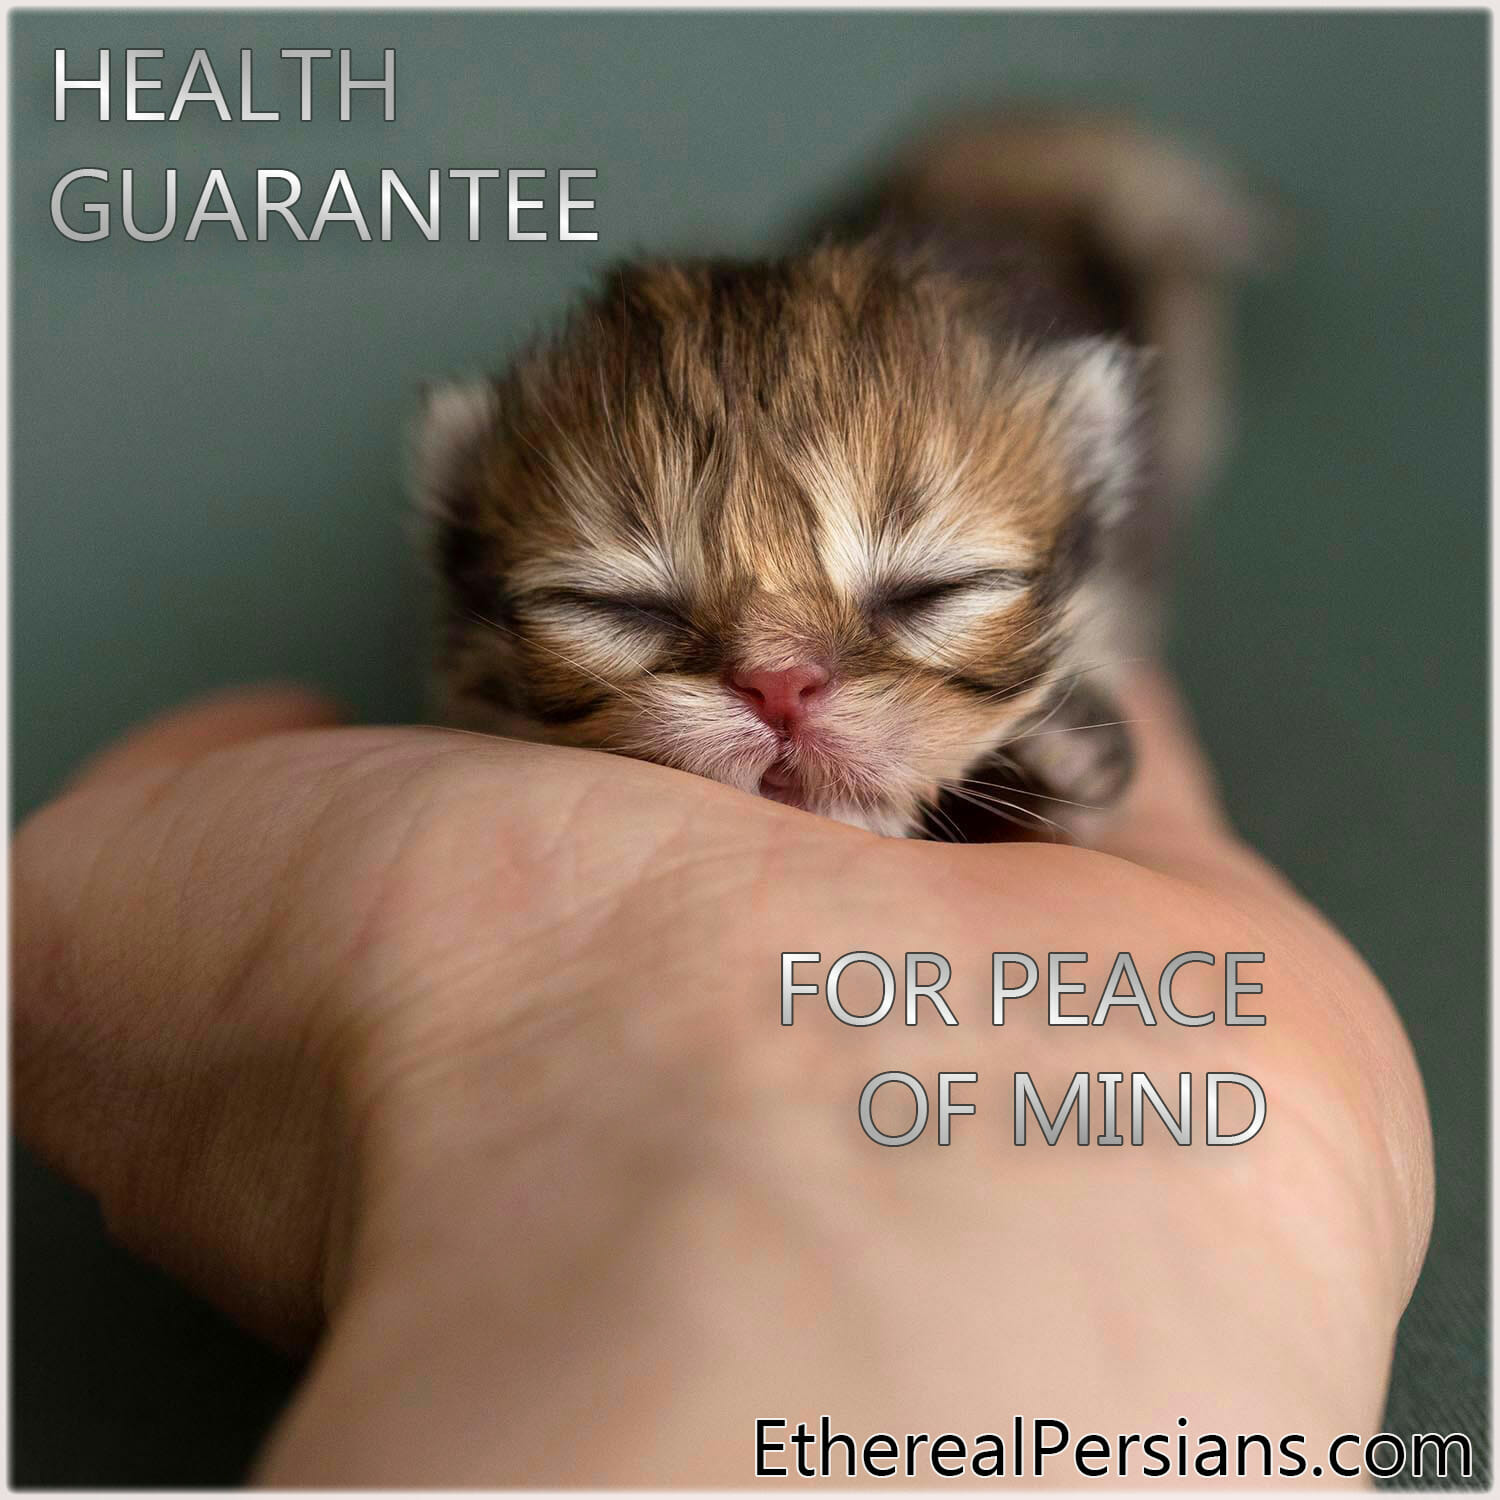 Arm reaching and holding golden persian kitten in palm.